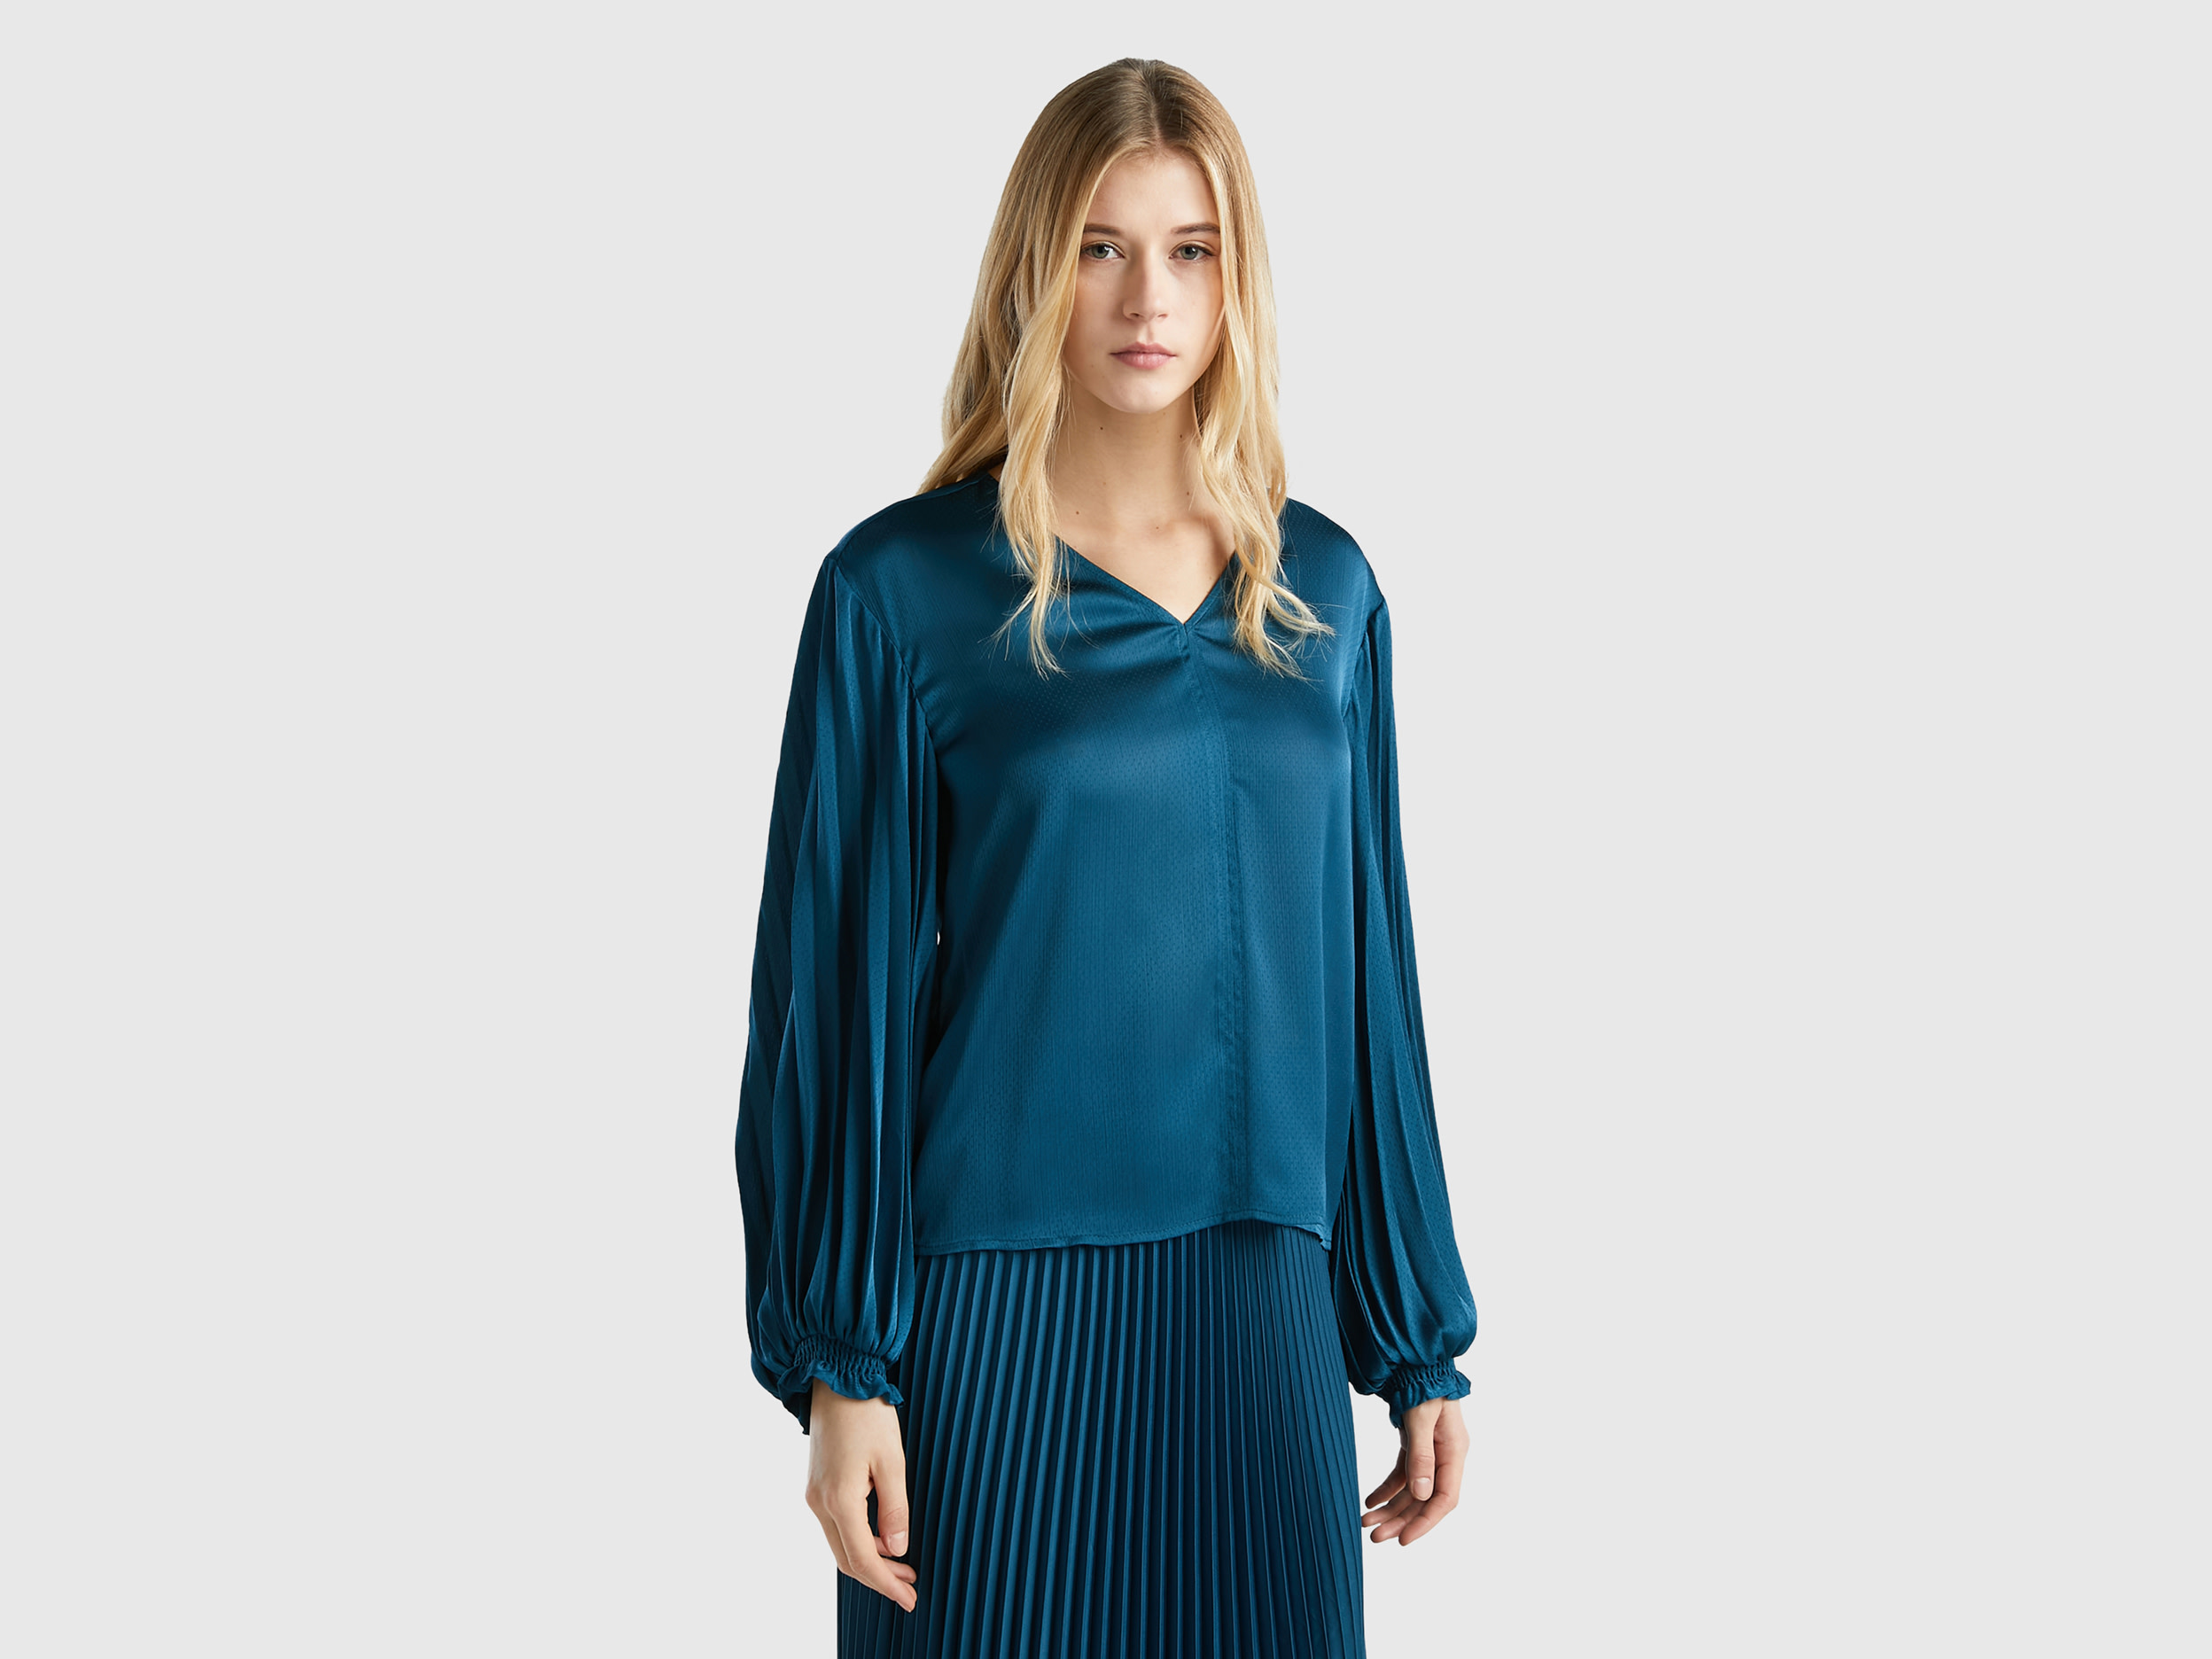 Benetton, Blouse With Long Pleated Sleeves, size S, Teal, Women